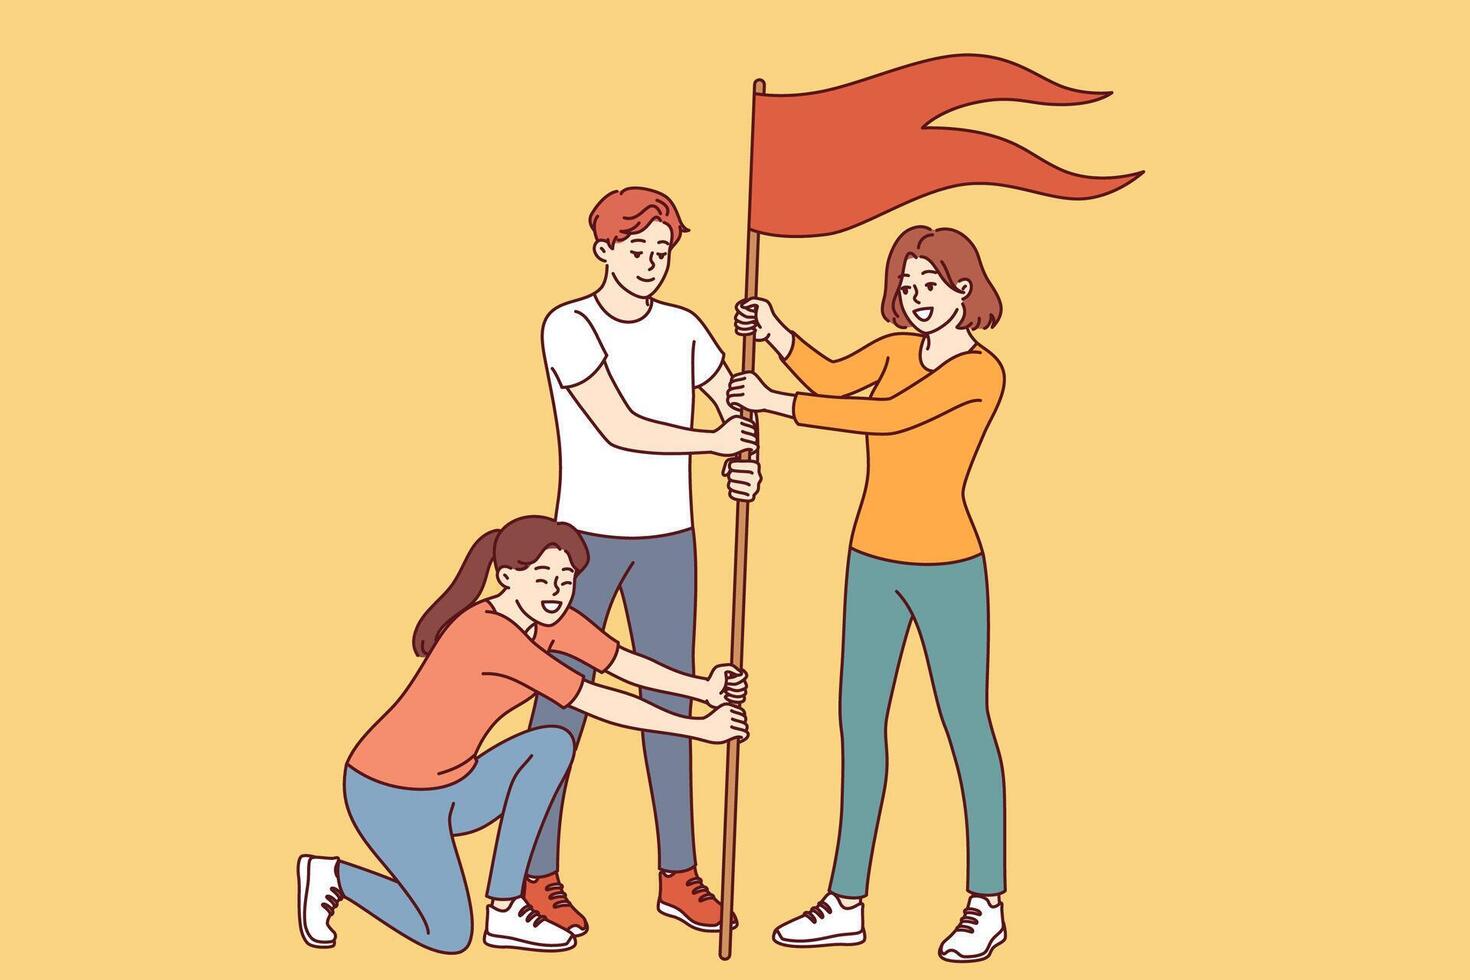 Team of successful people plants victory flag, symbolizing excellent teamwork and personal growth vector